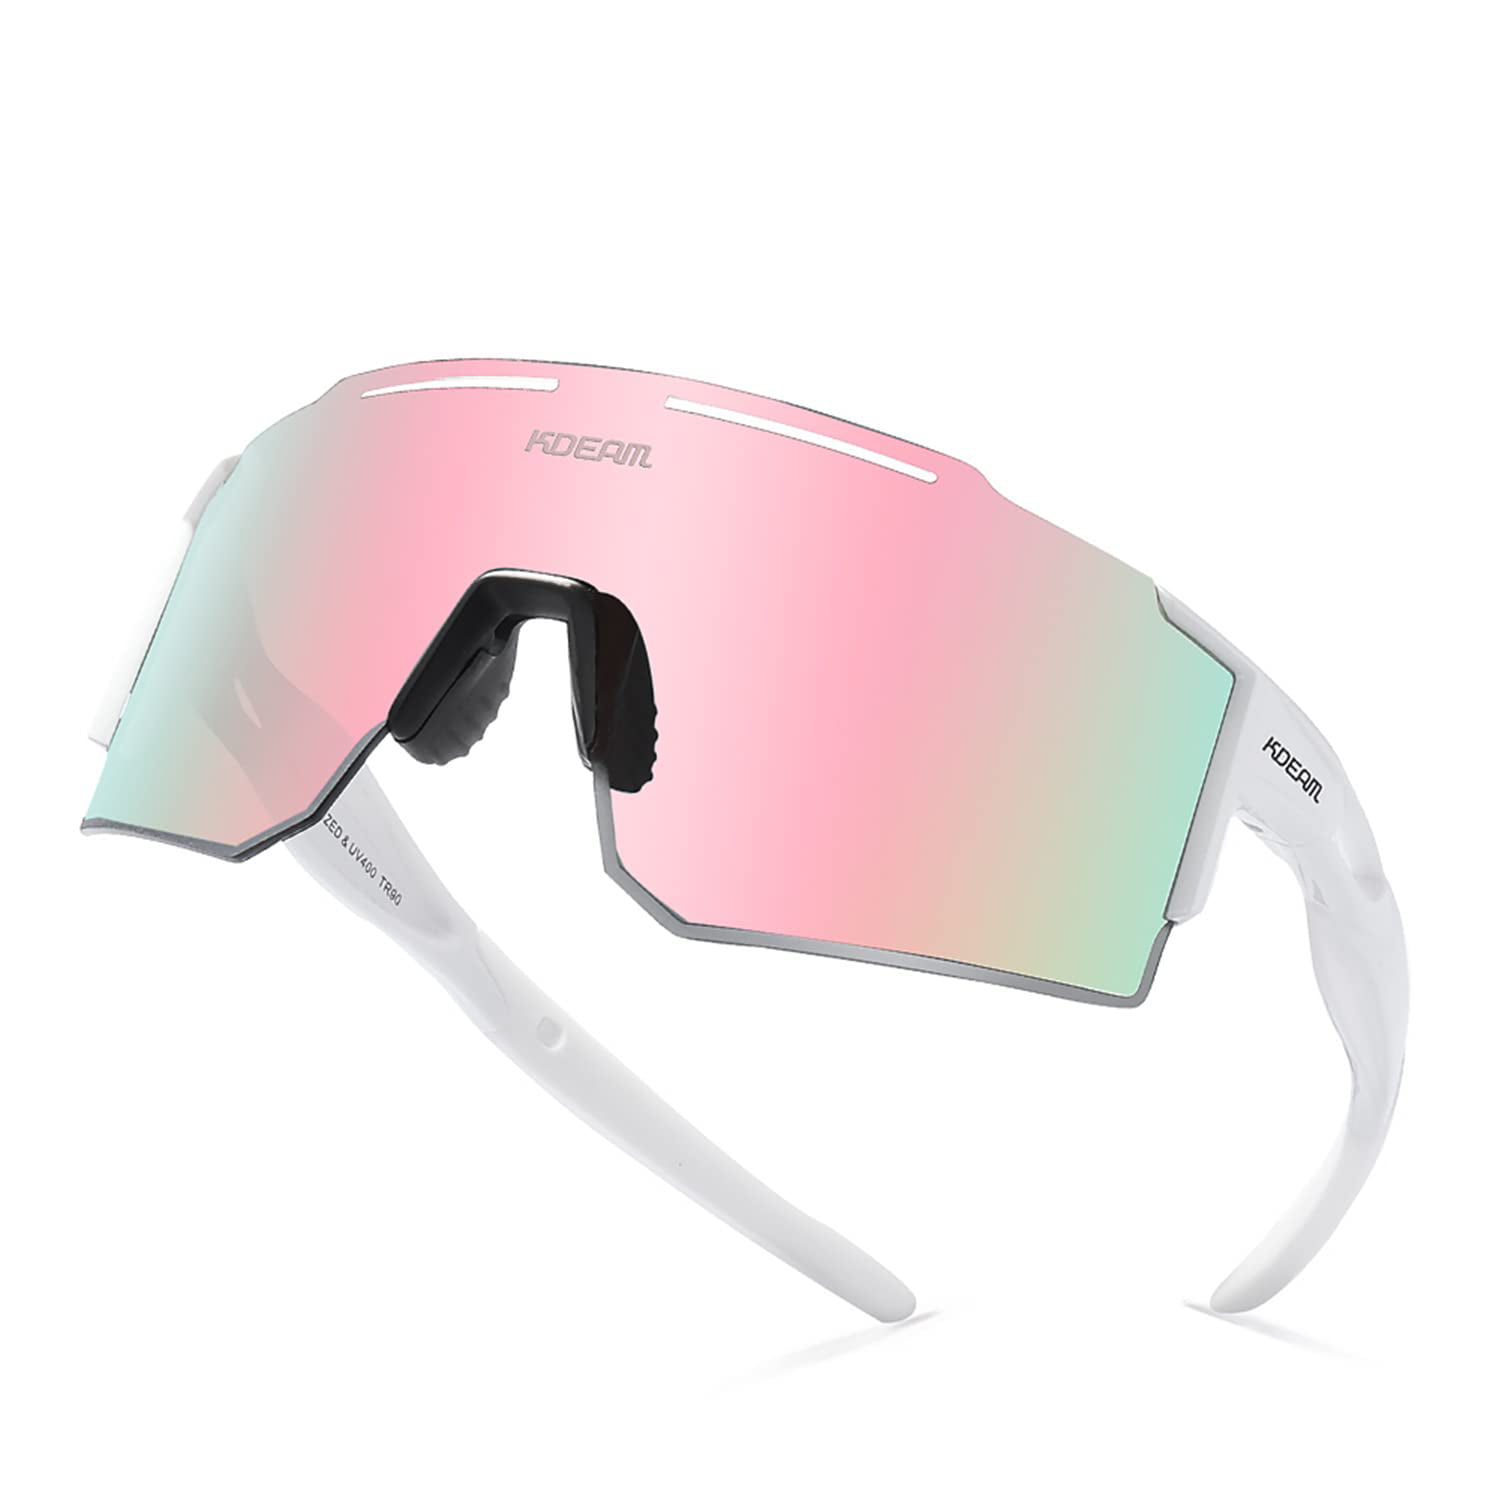 Pit-viper Sunglasses for Men and Women Windproof Eyewear UV400 UV400 Polarized Polarized TR90 Frame Sunglasses Color Electroplating Film Pit Viper Sunglasses Outdoor Cycling Glasses 